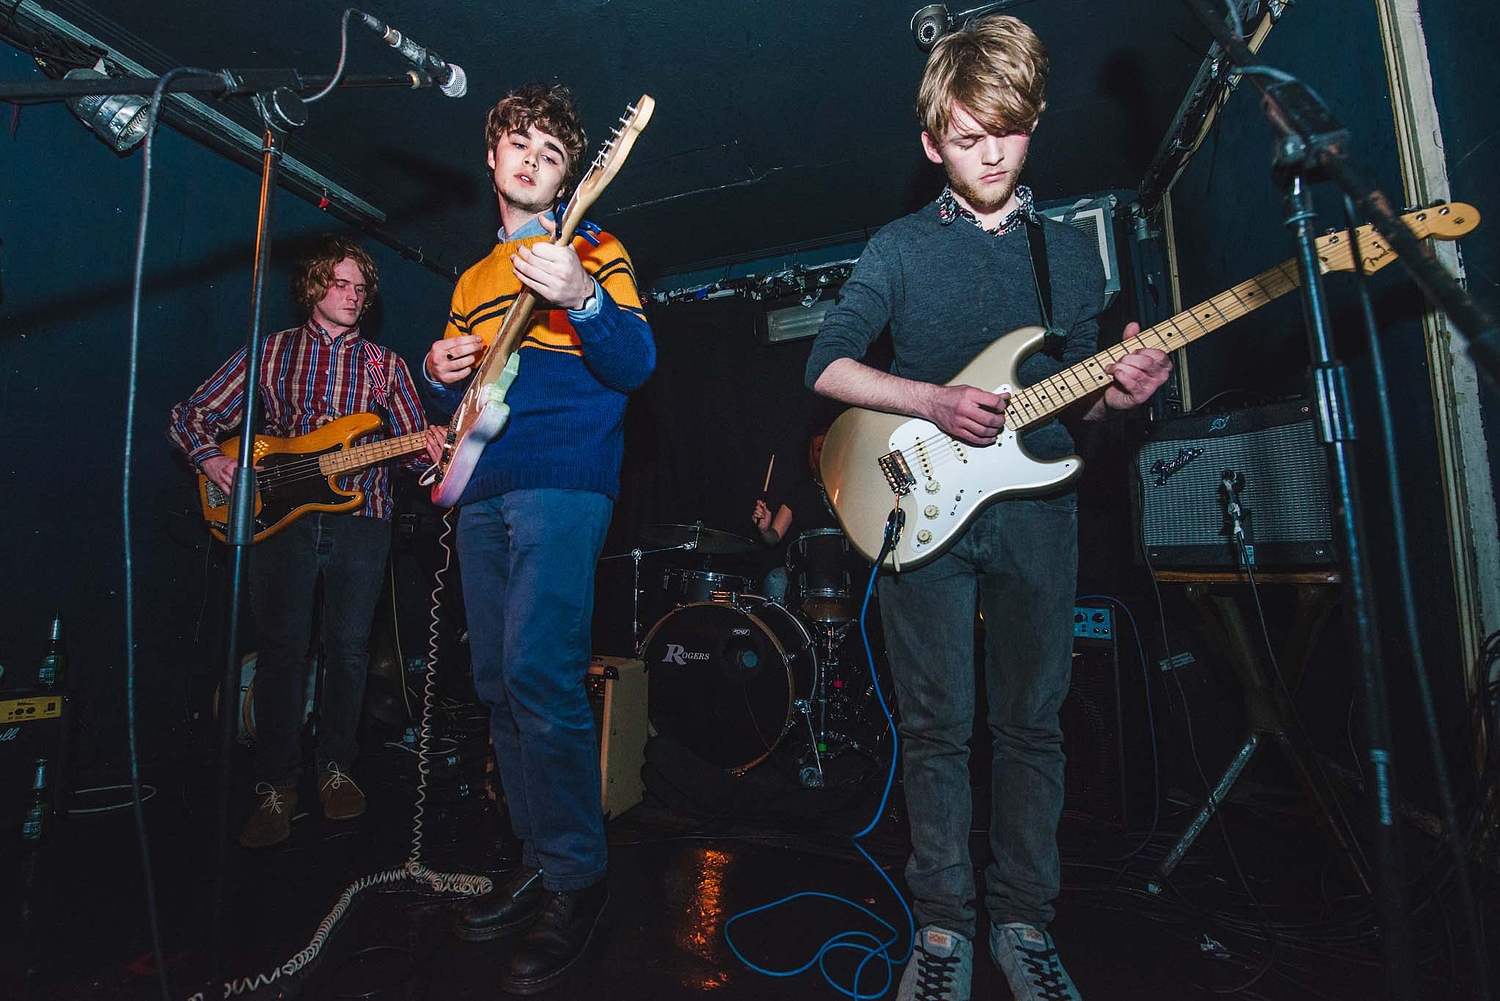 The Magic Gang bring frenzied close to first night of DIY's Hello 2015